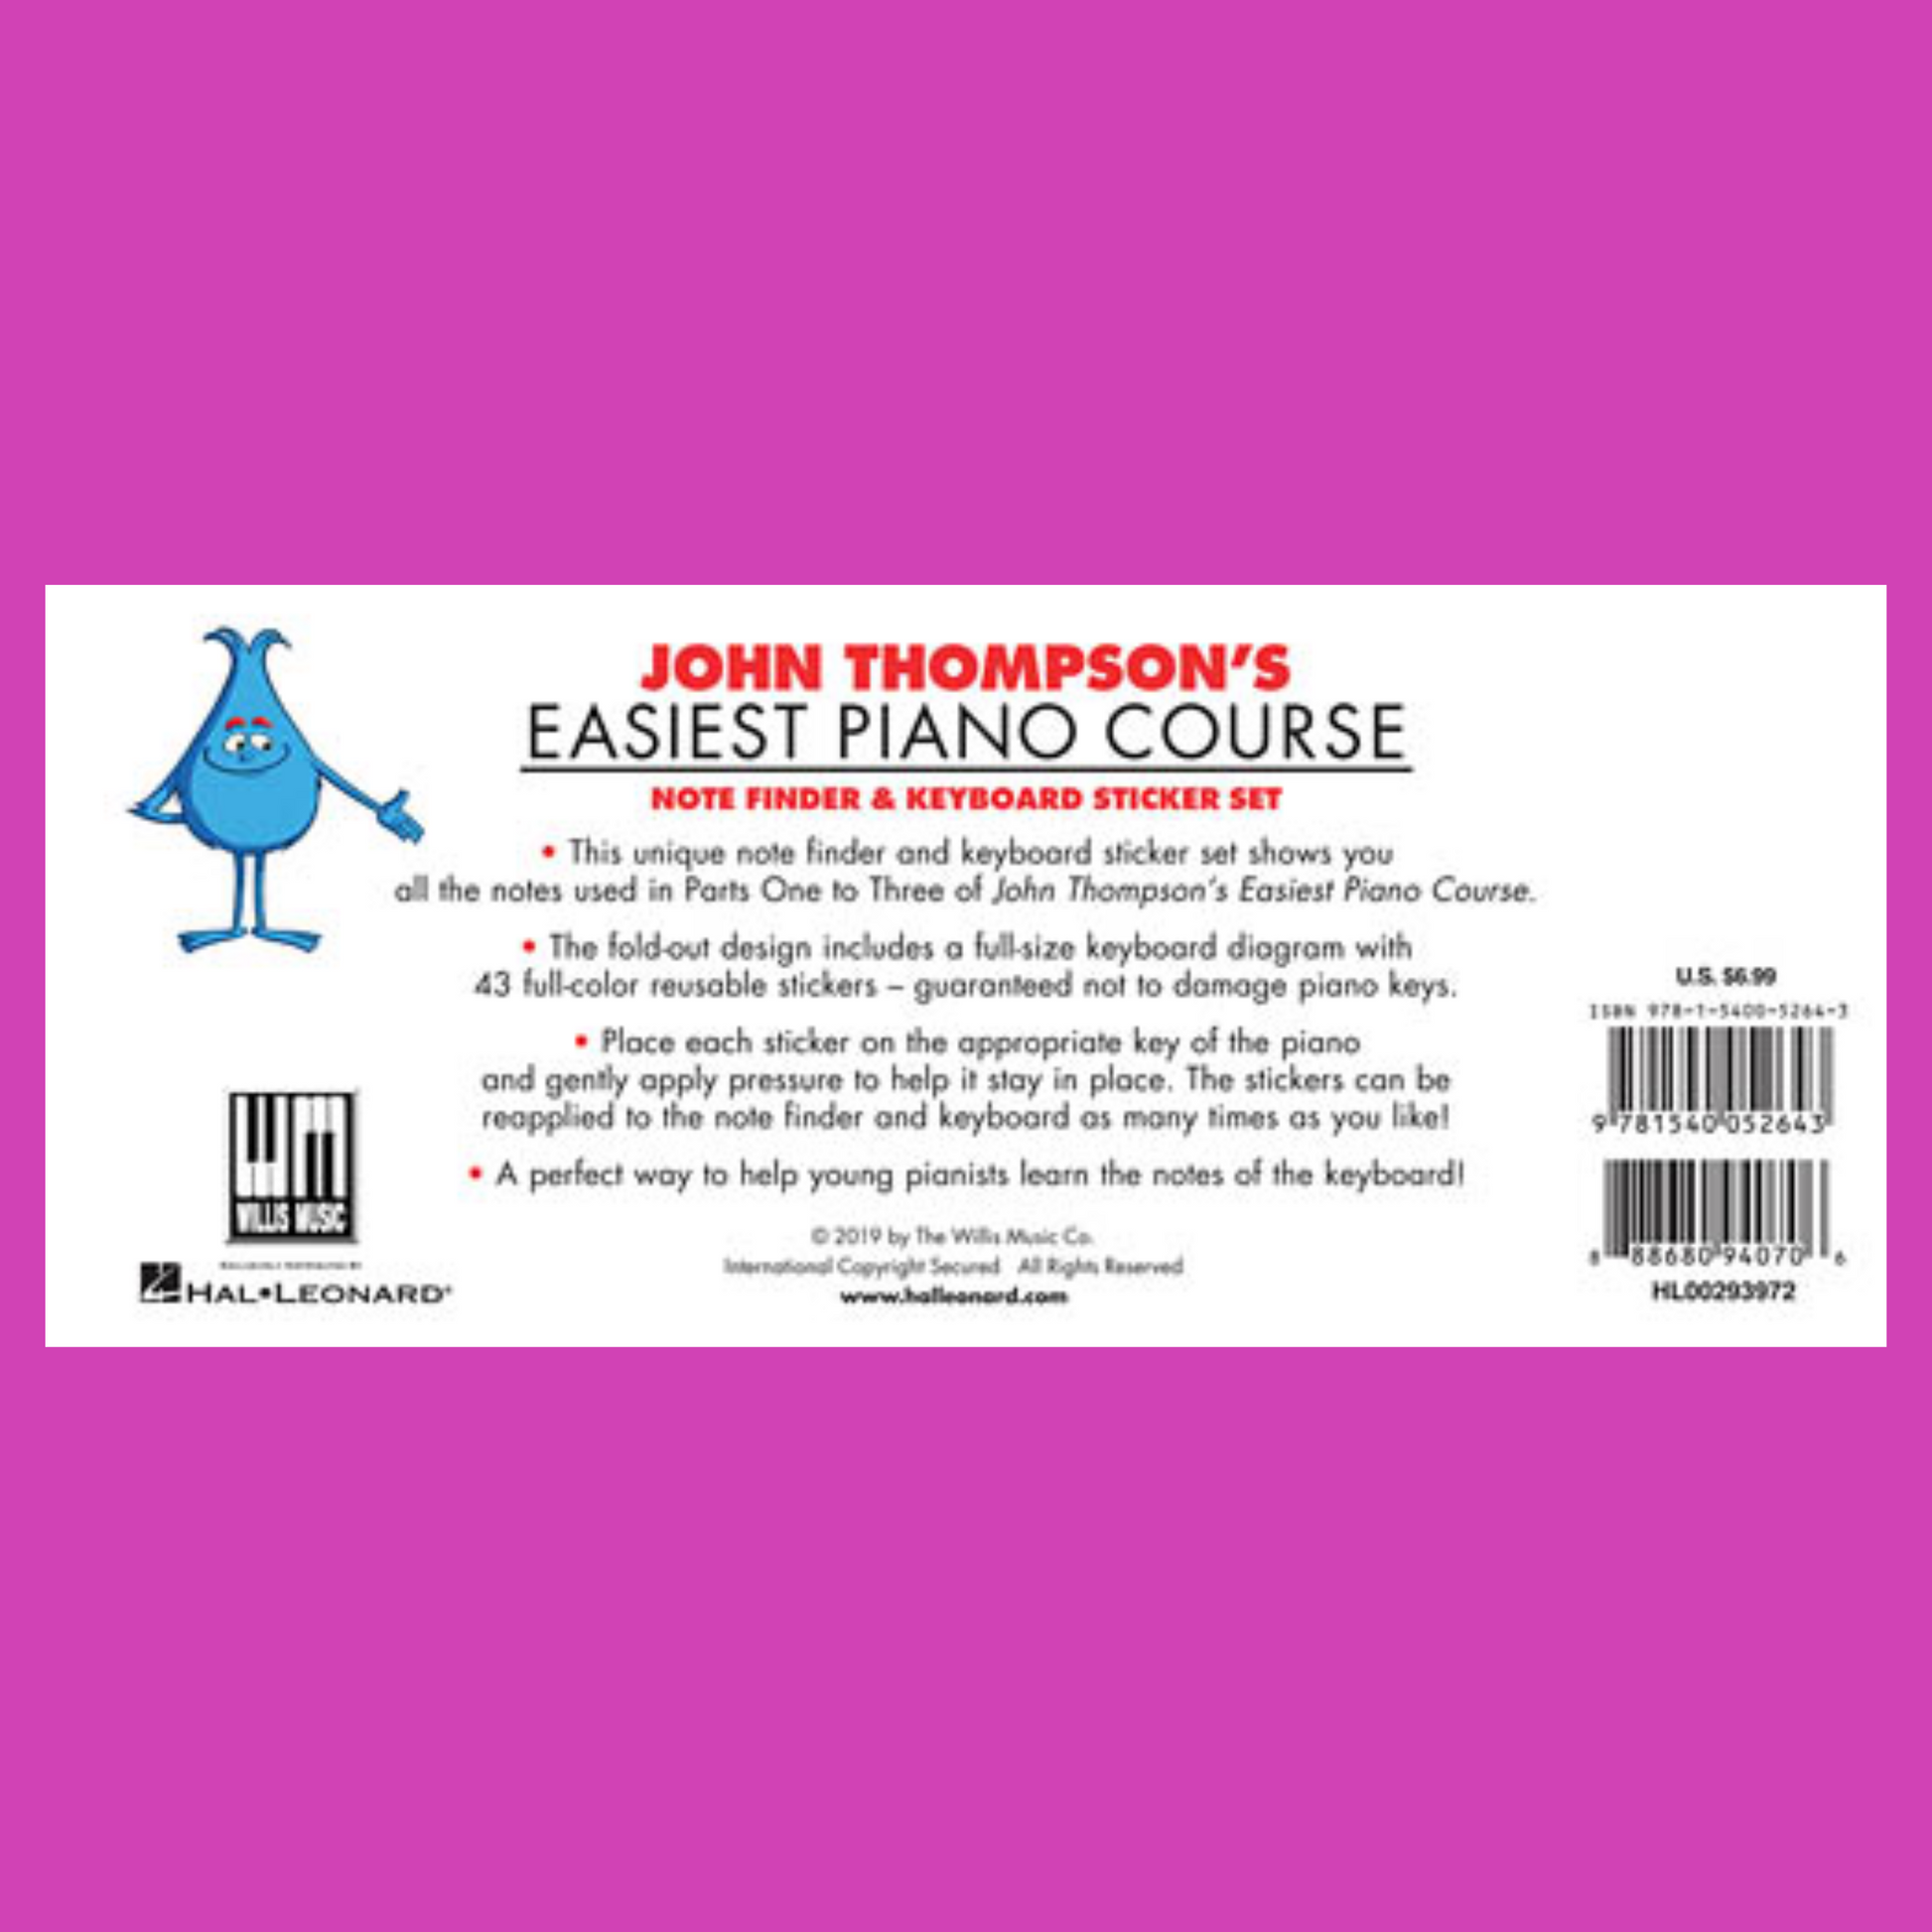 John Thompsons Easiest Piano Course - Note Finder & Keyboard Sticker Set